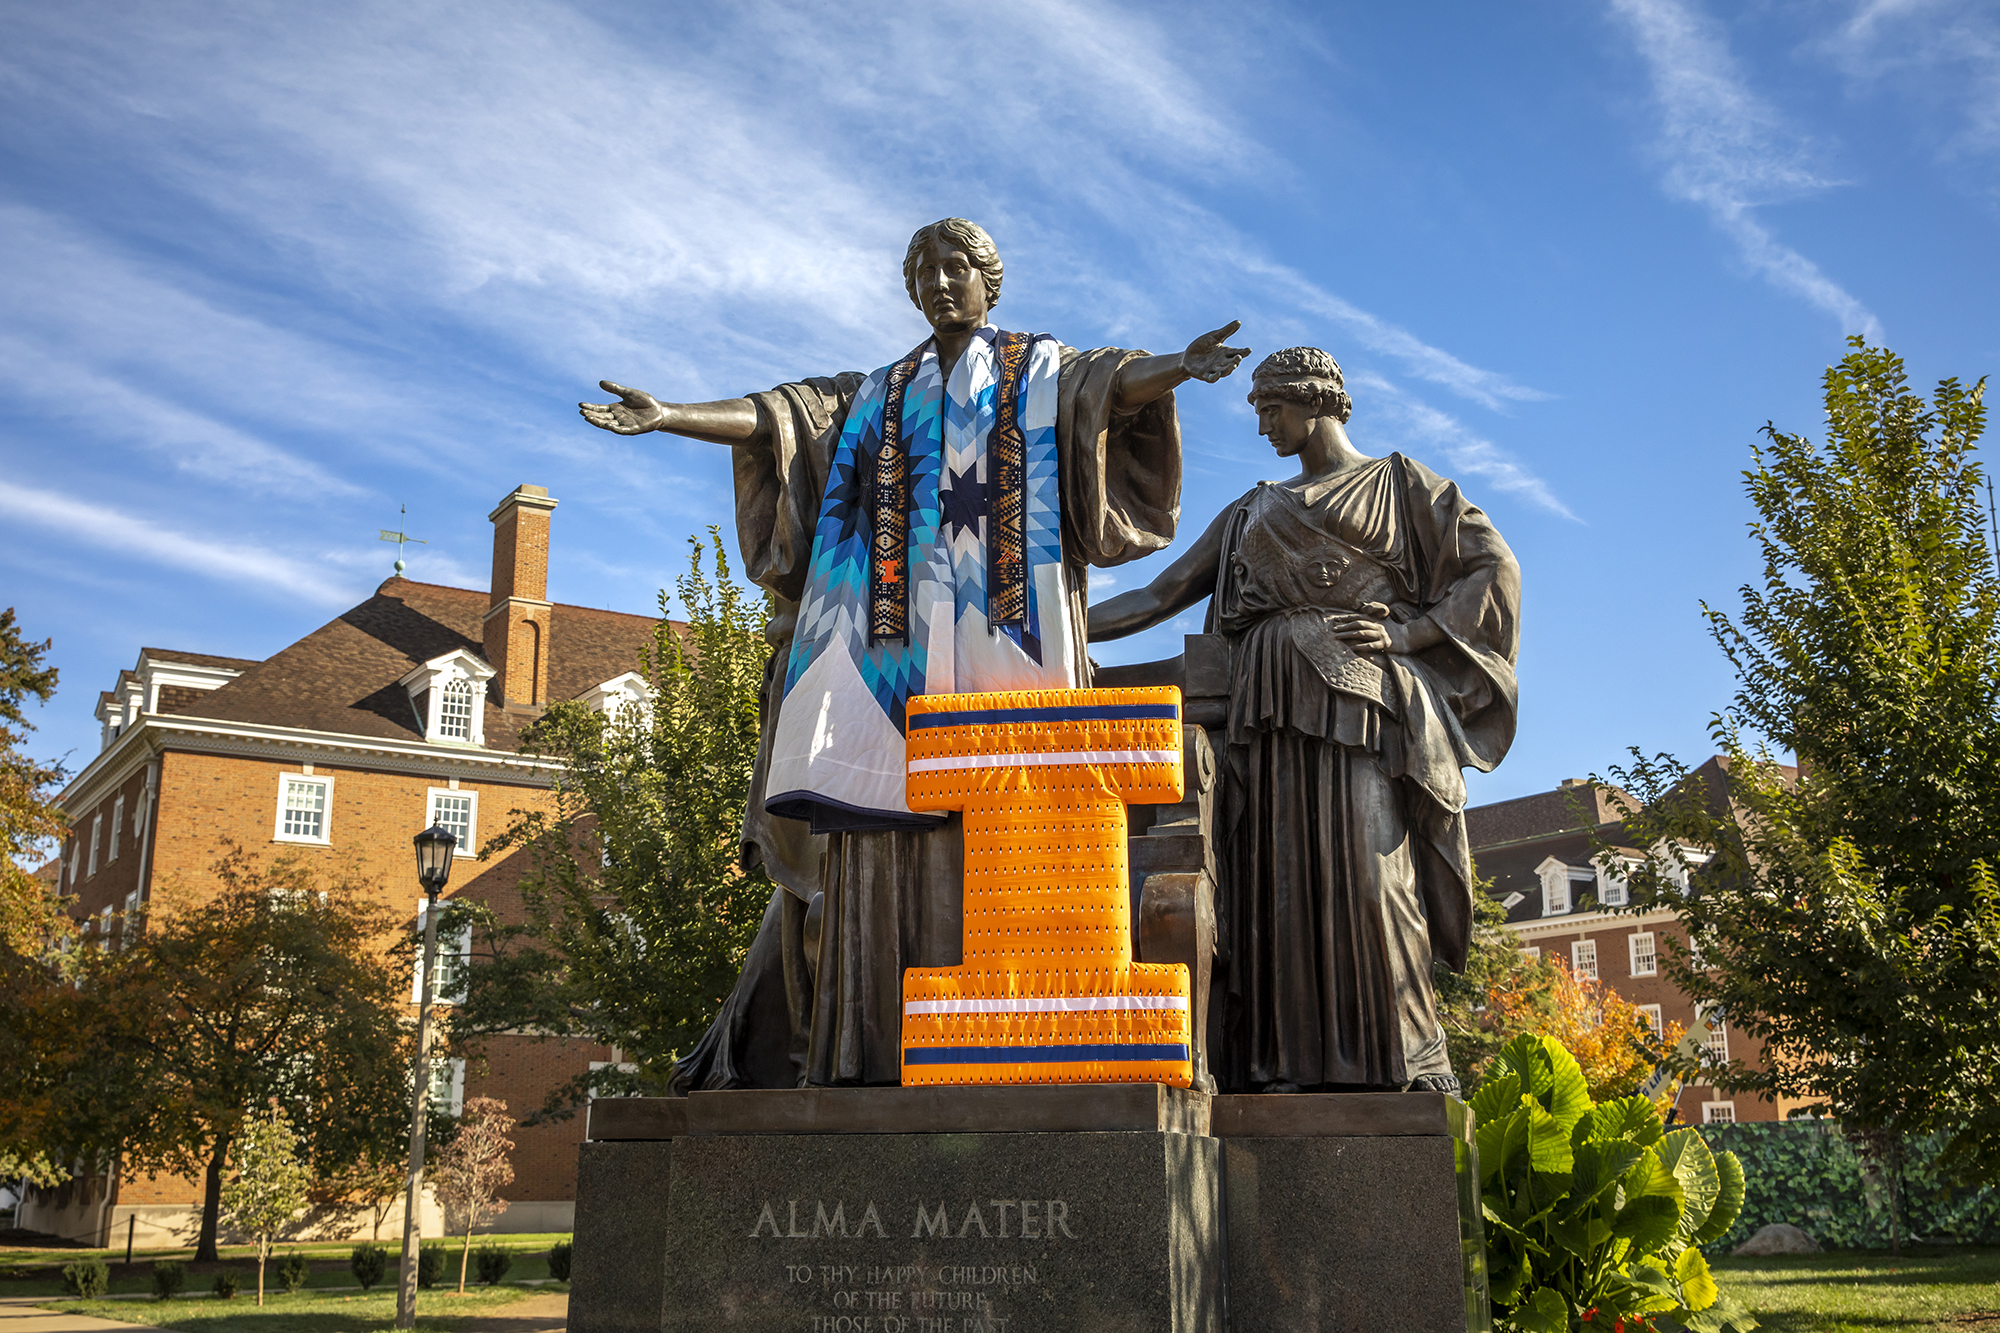 Picture of Alma Mater decorated in a Native blanket with different shades of blue and white, as well as a graduation stole with Native/geometric designs in darker colors. There is also a big &quot;I&quot; in orange, blue and white leaning against Alma Mater. There are clear blue skies and the Illini Union in the background, alongside trees and plants.